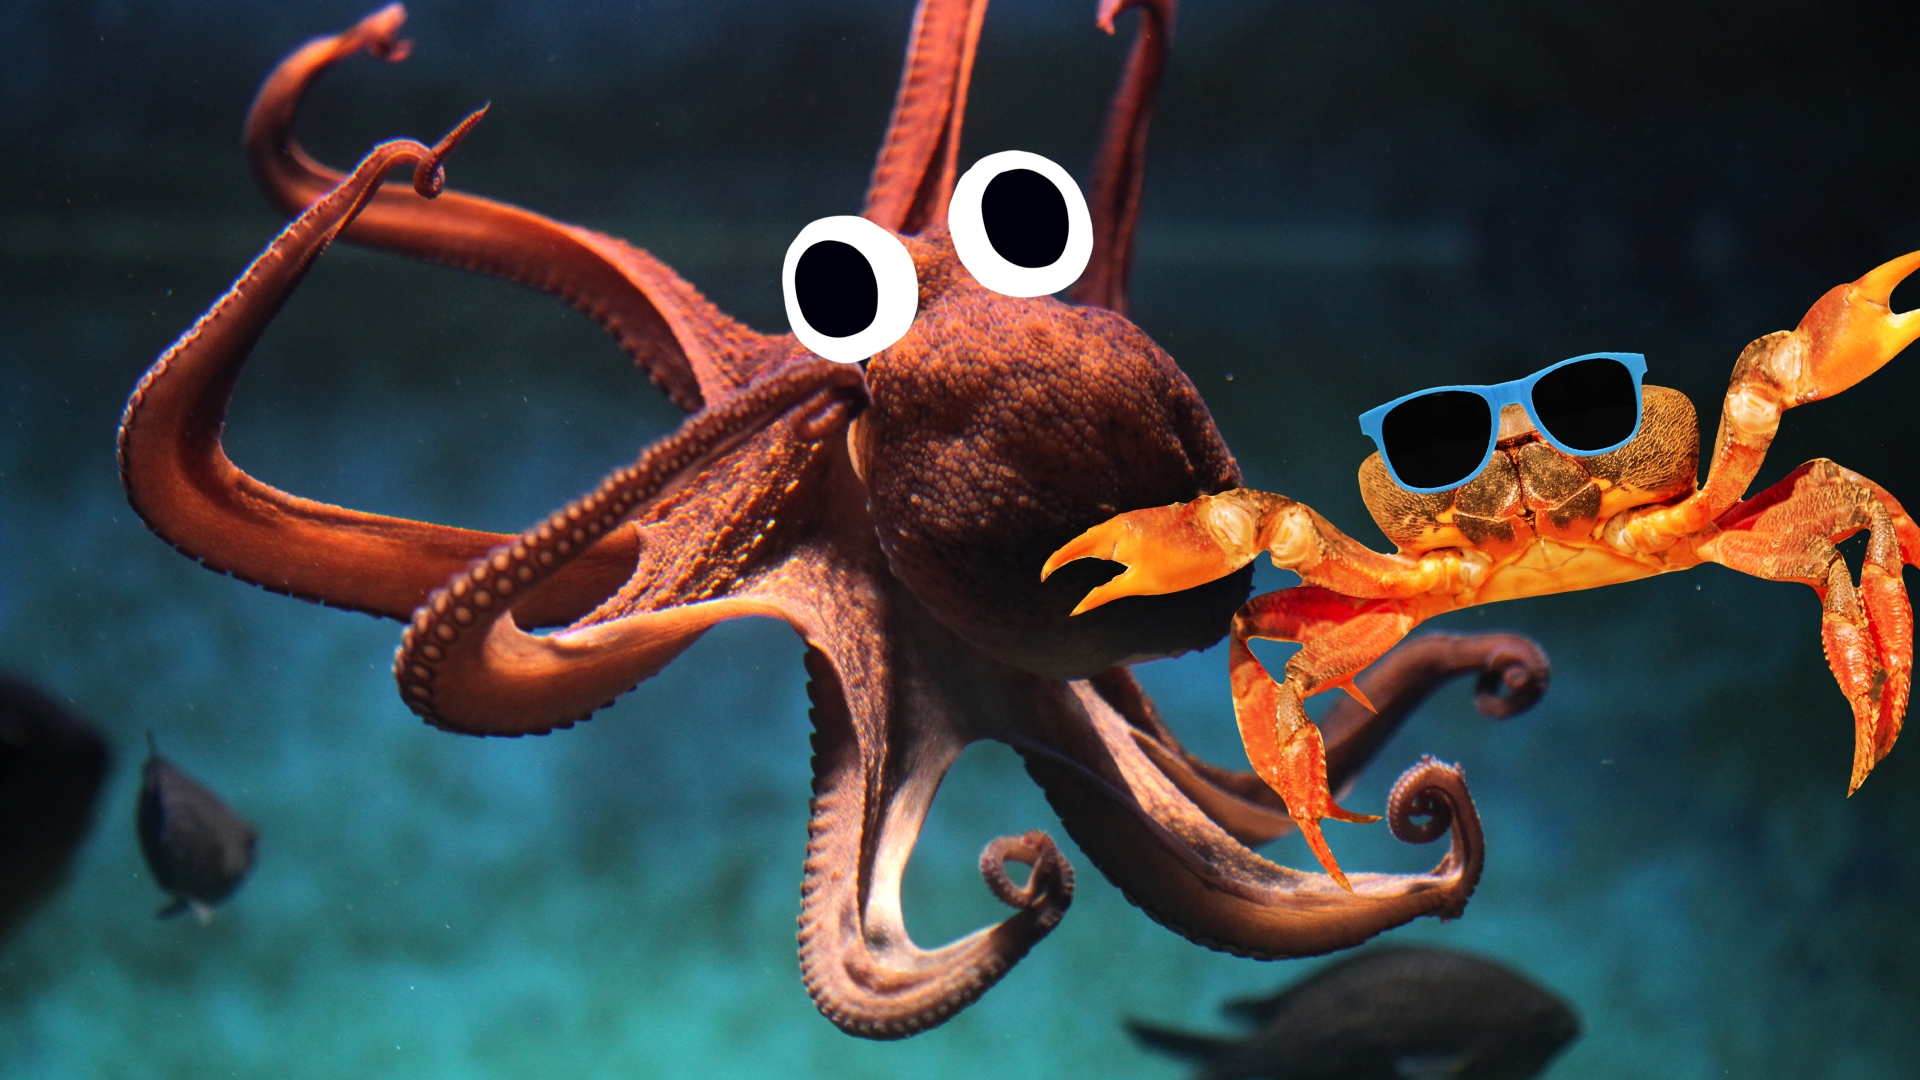 Octopus and other sea creatures